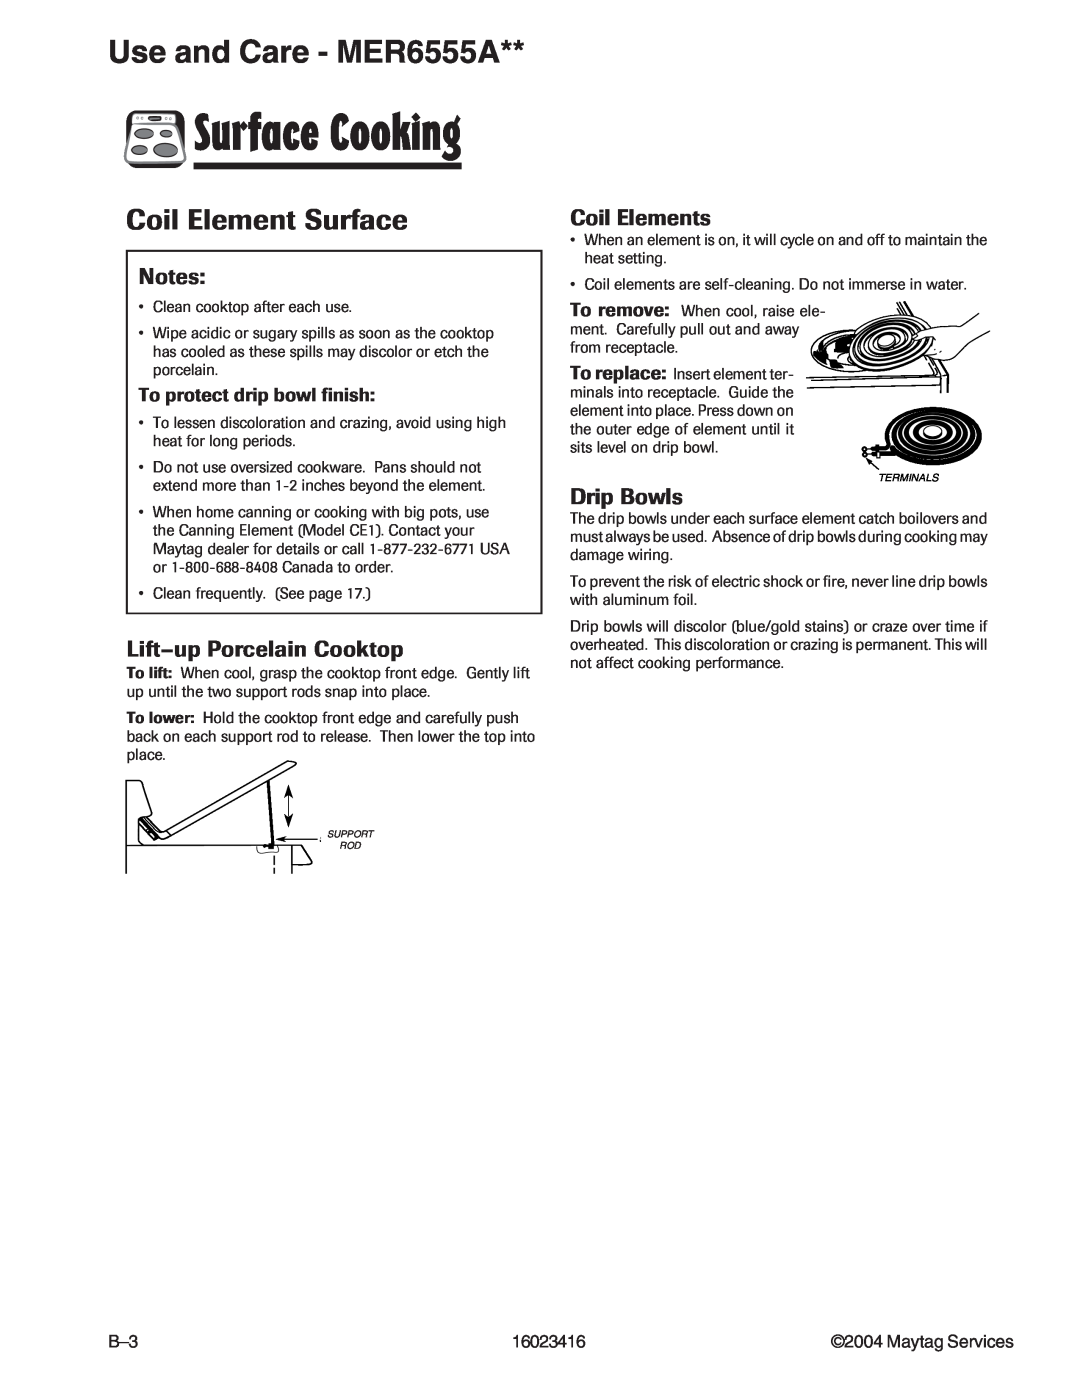 Maytag MER6775ACB/F/N/S/W, MER6555AAB/Q/W Coil Element Surface, Notes, Lift–upPorcelain Cooktop, Coil Elements, Drip Bowls 